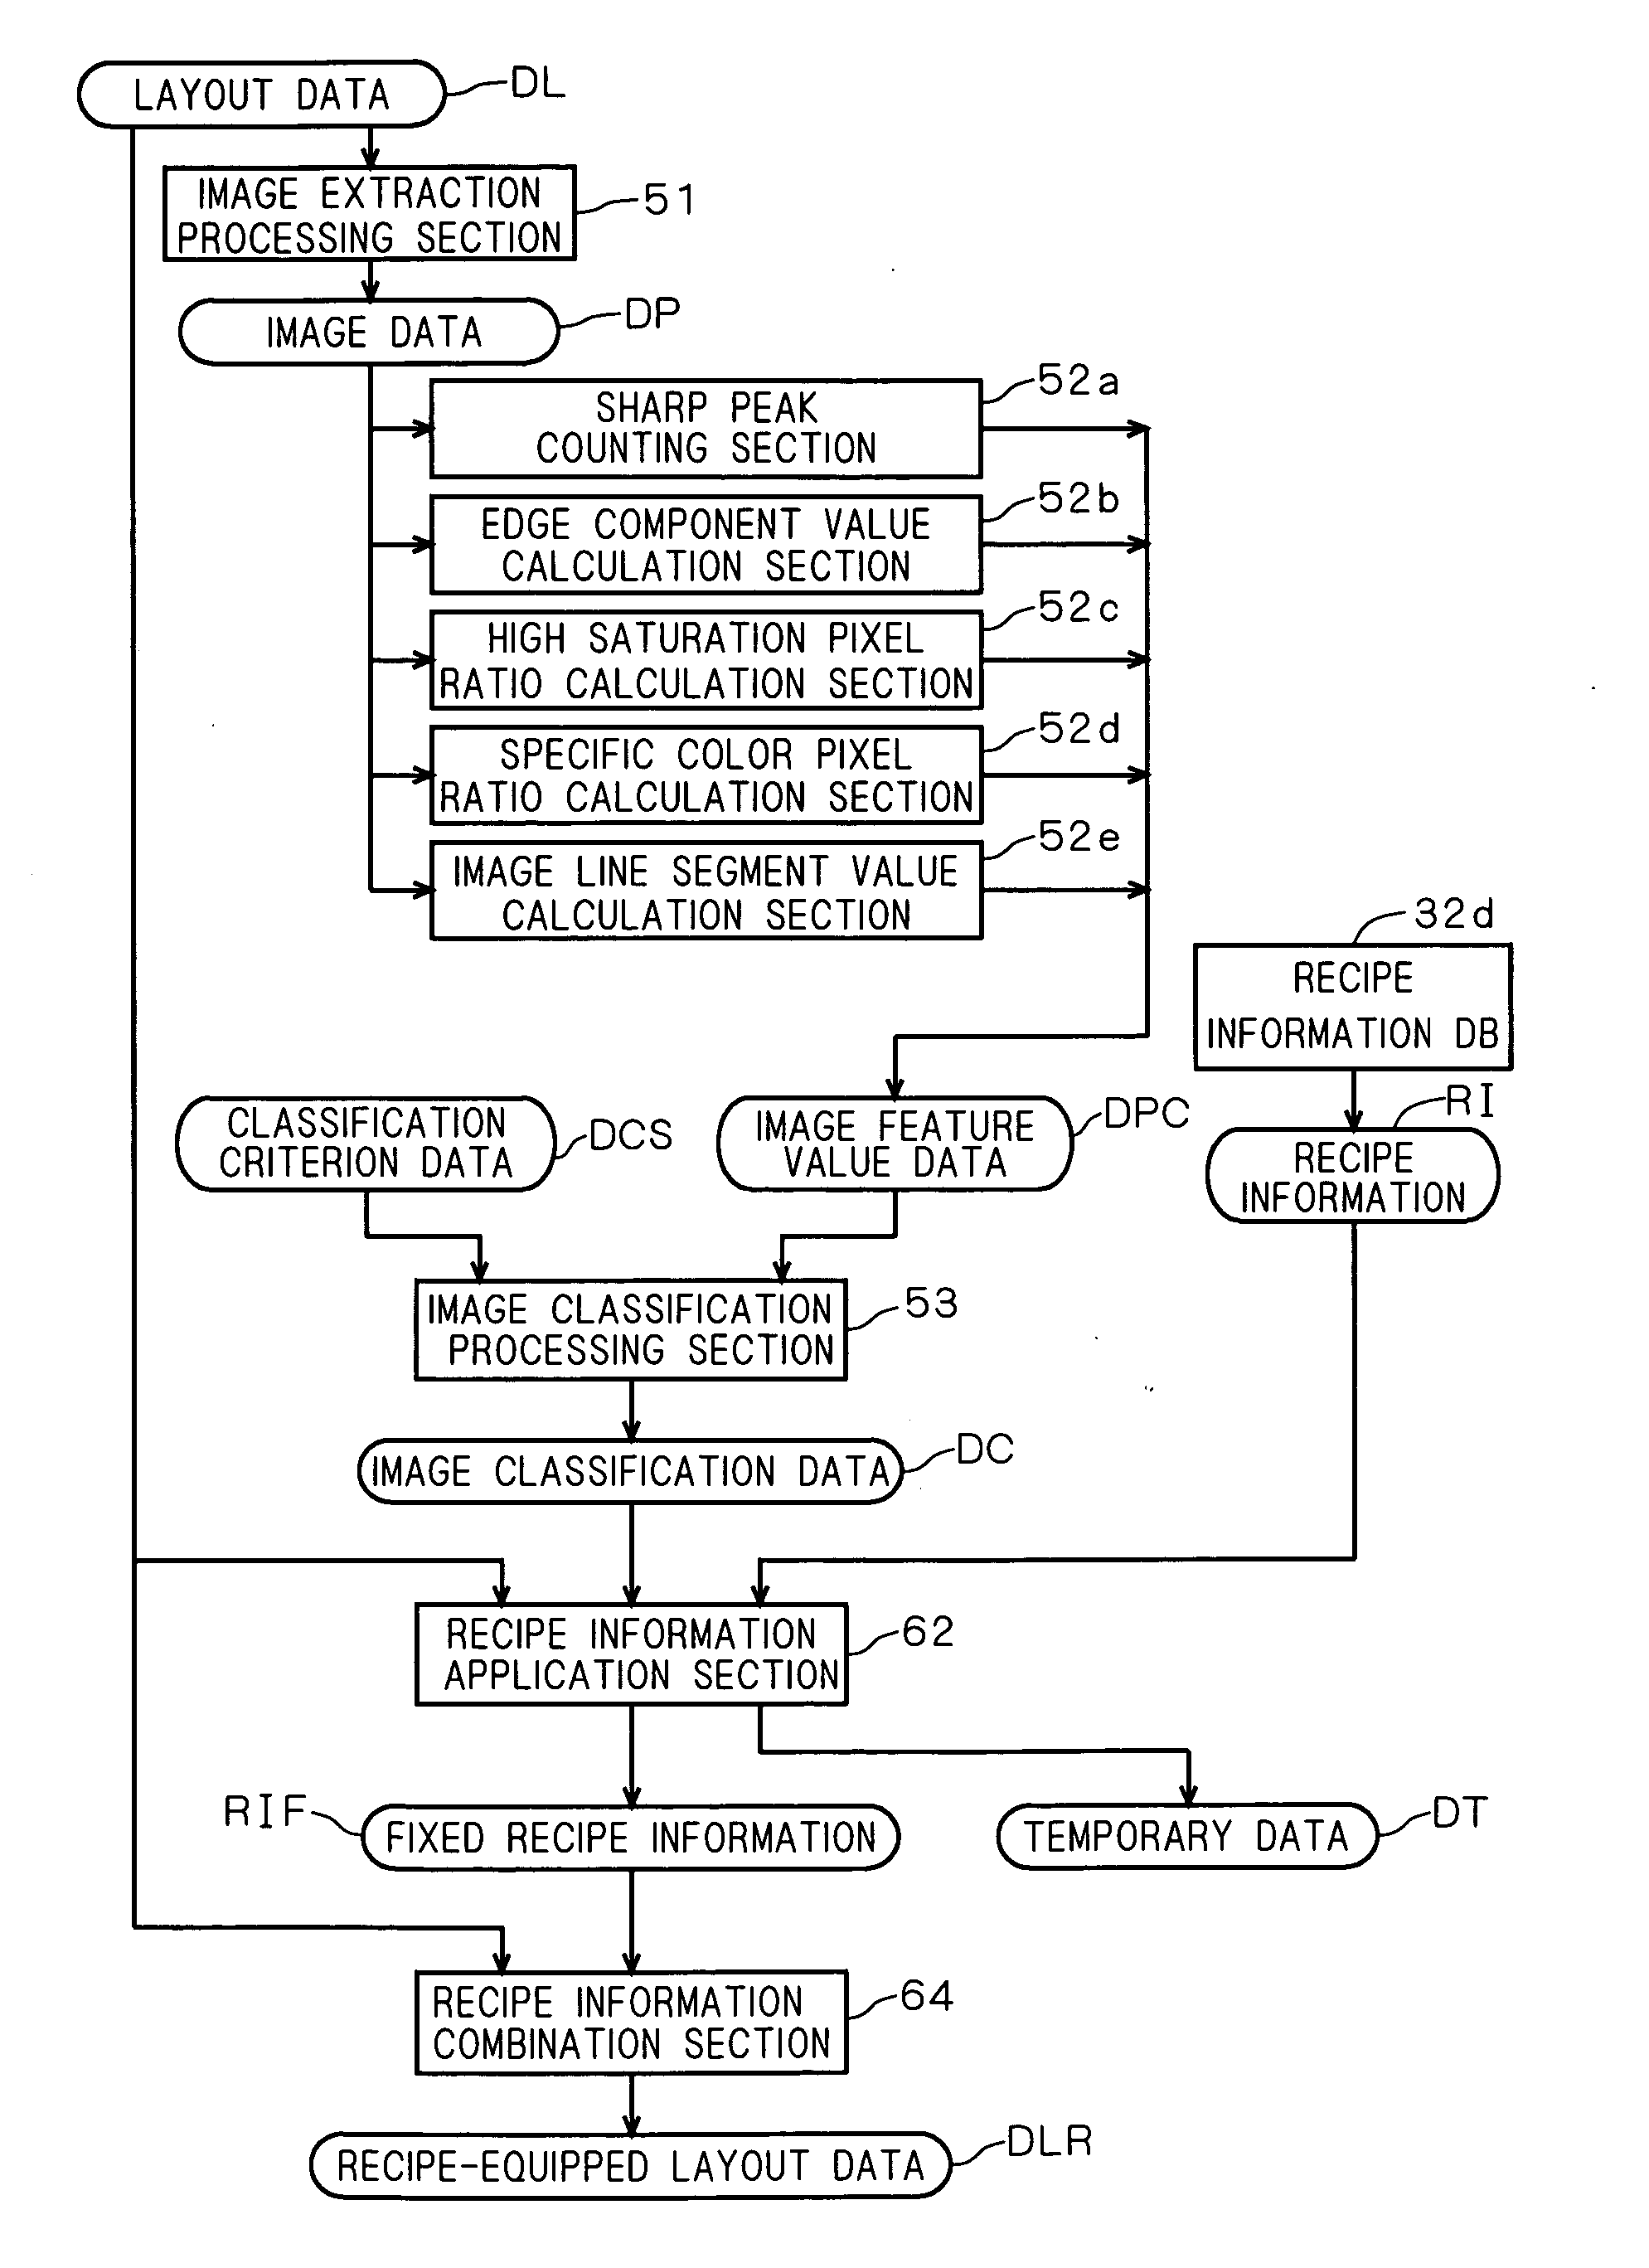 Image processing information association processor, printing system, method of enabling layout data output, and program